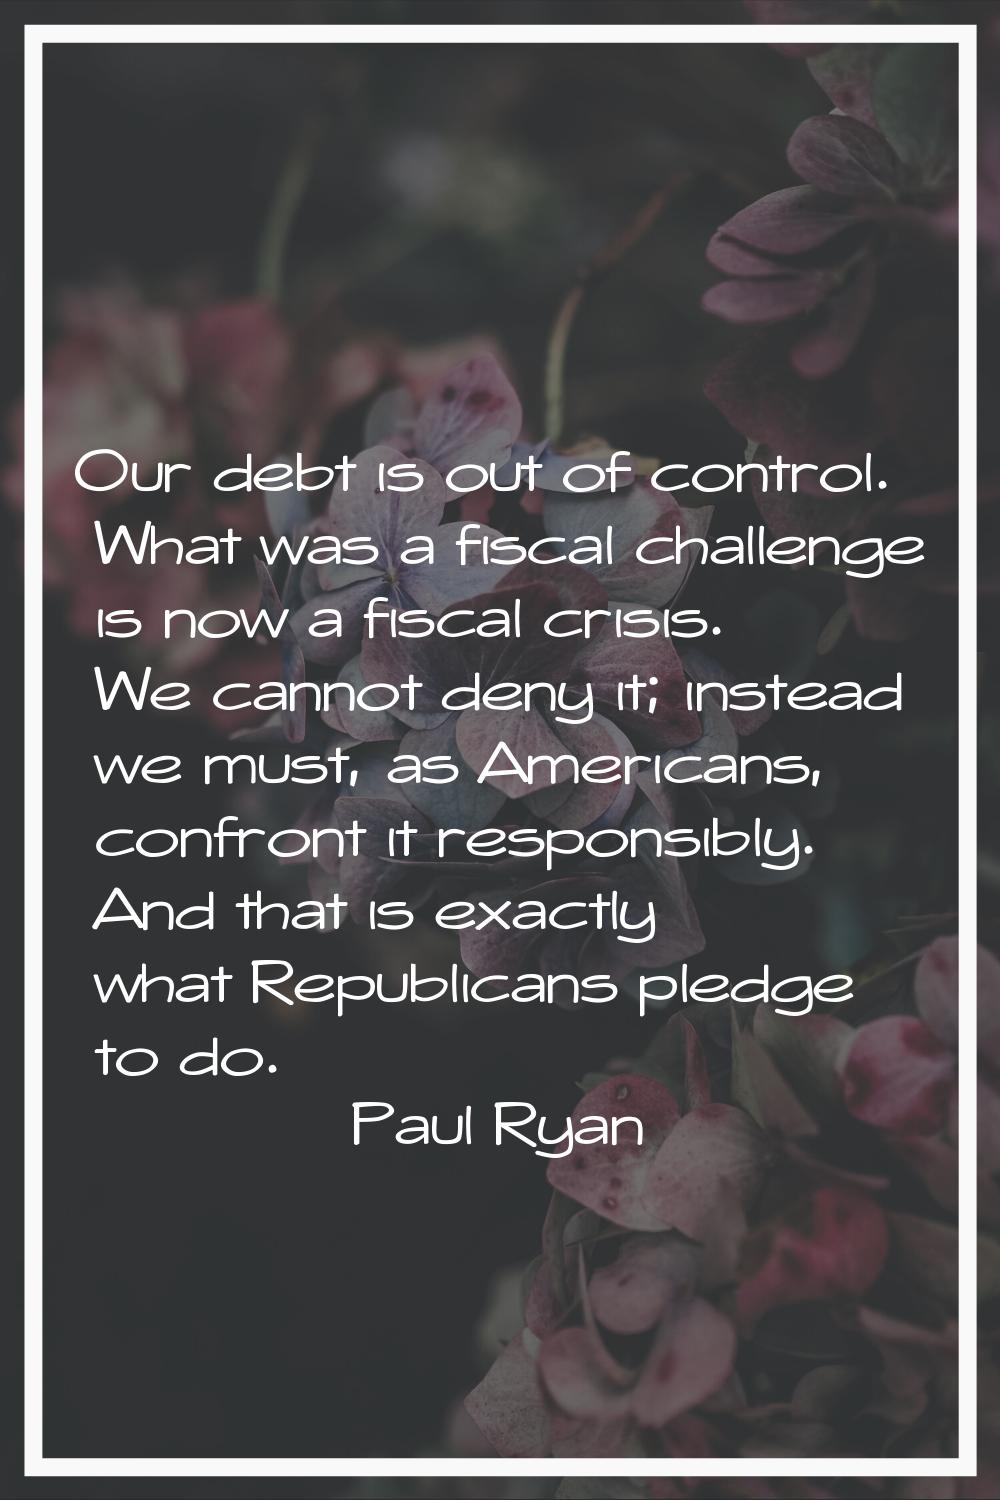 Our debt is out of control. What was a fiscal challenge is now a fiscal crisis. We cannot deny it; 